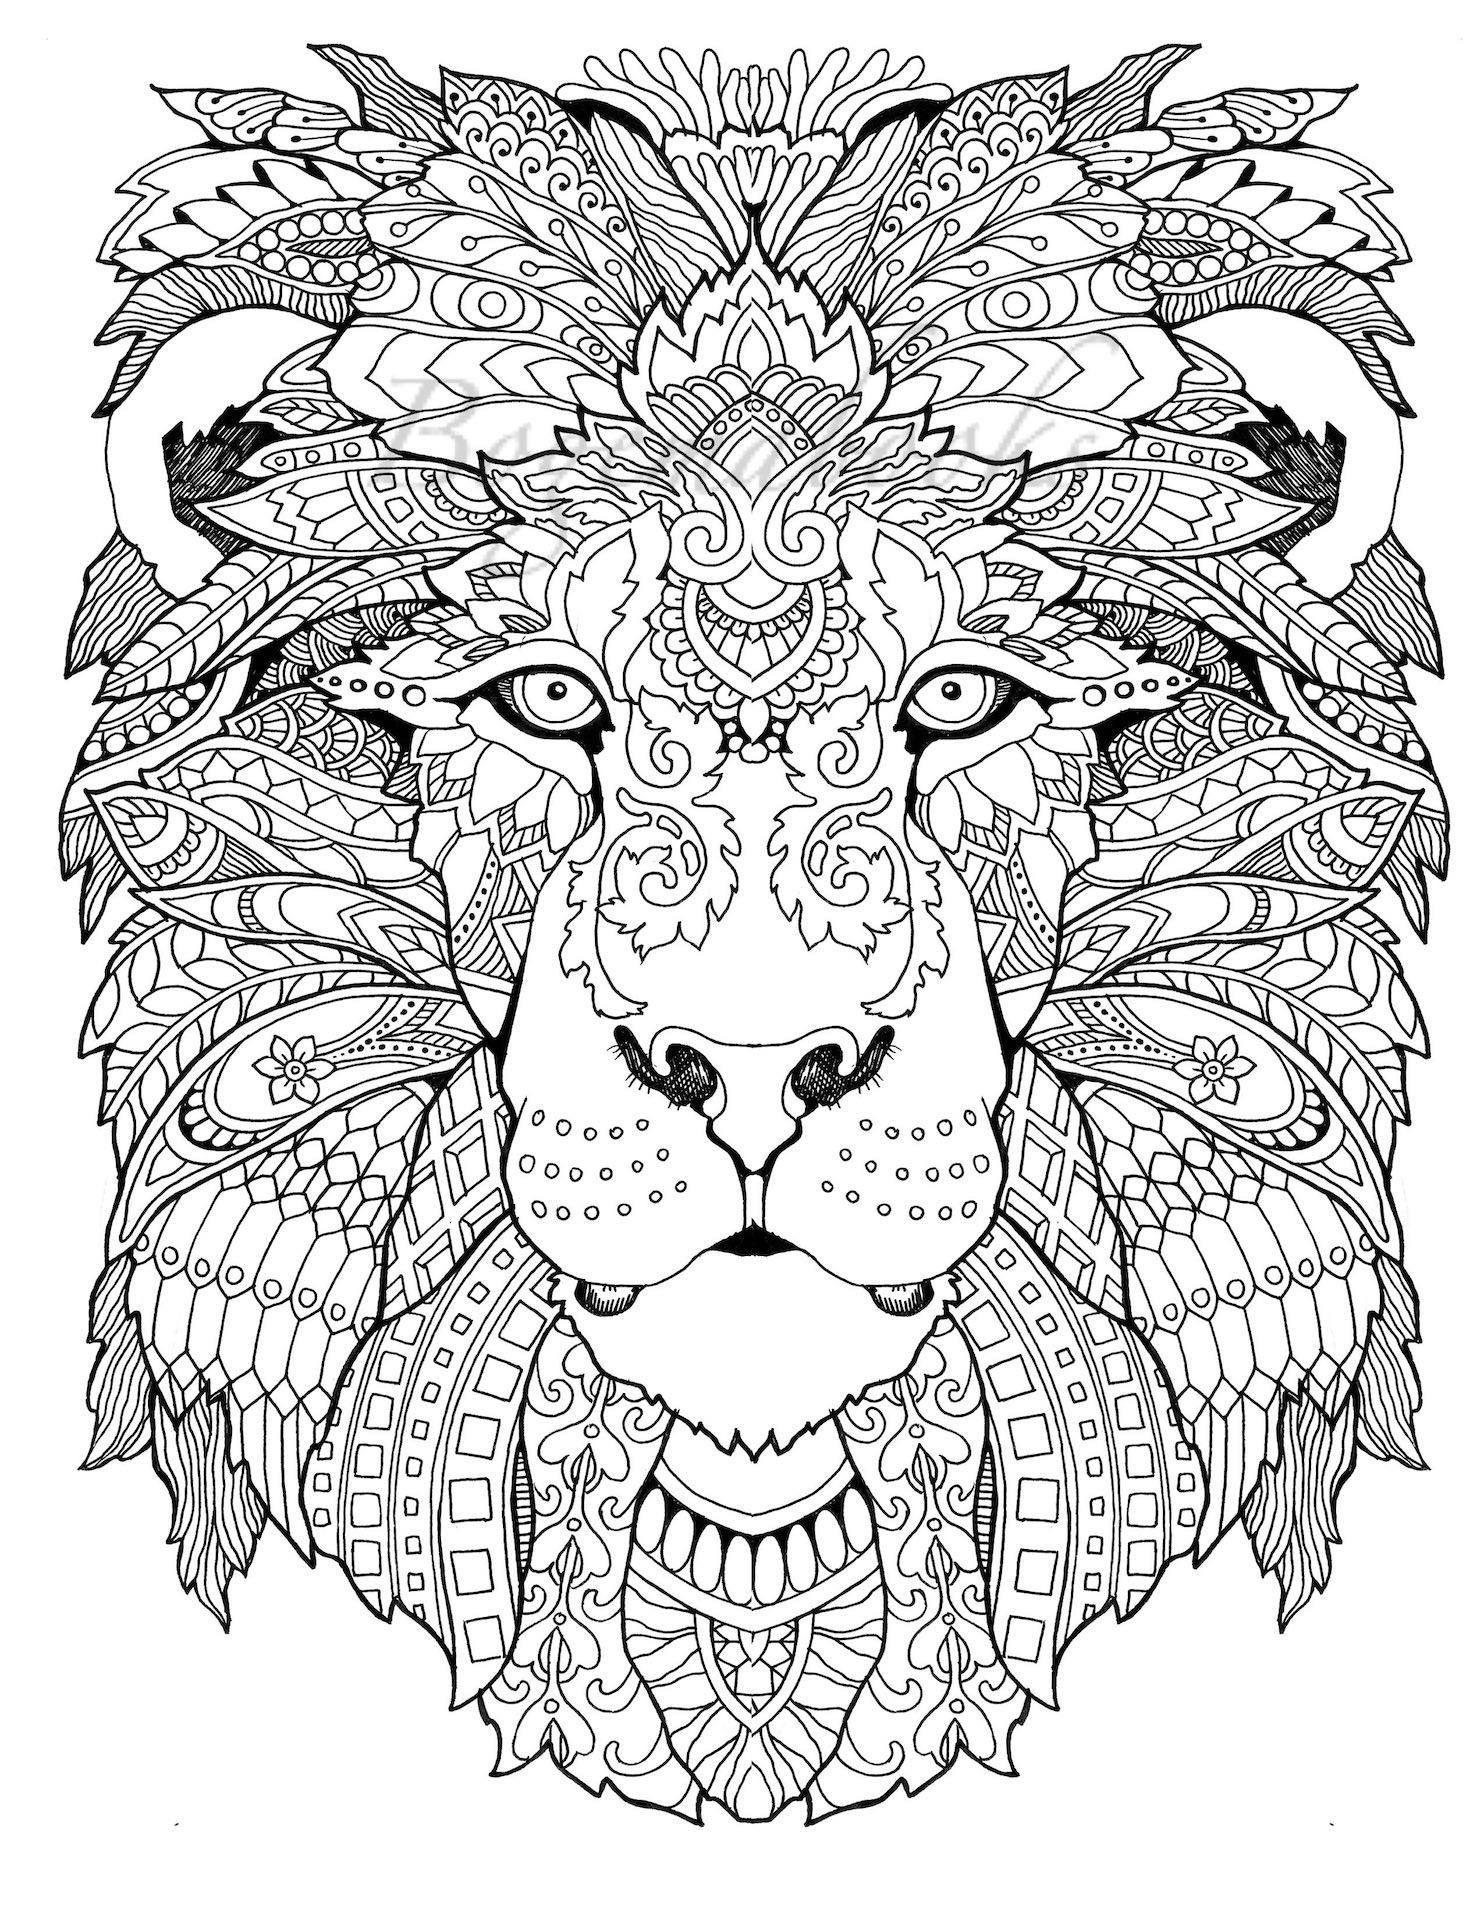 Coloring Pages For Adults Printable Animals
 Awesome Animals Adult Coloring Book Coloring pages PDF